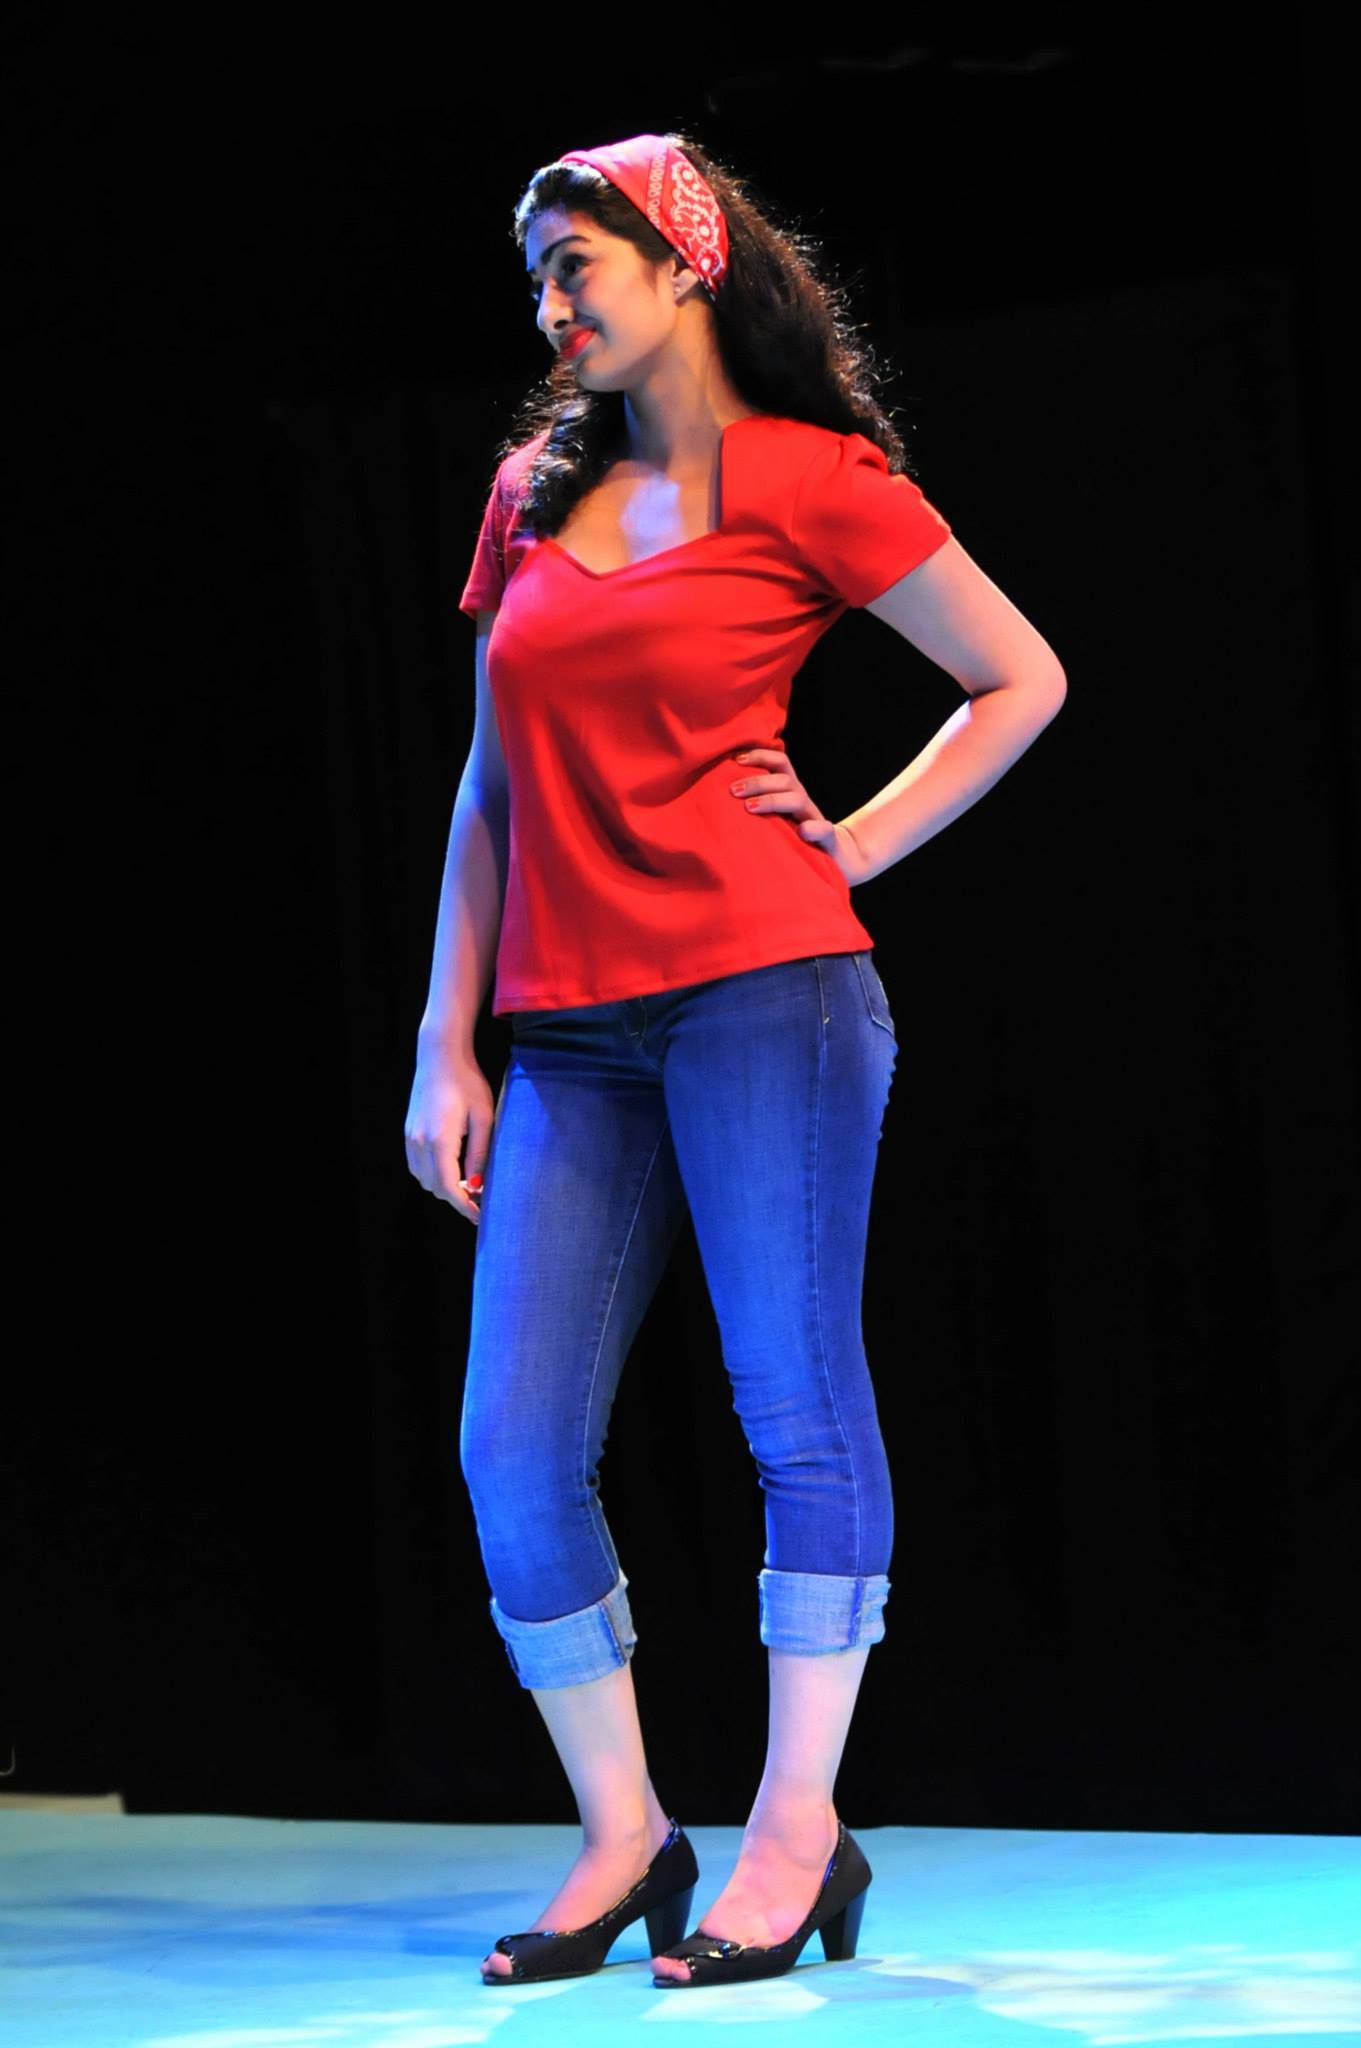 Our Teenage Granddaughter Performing in her School Theater